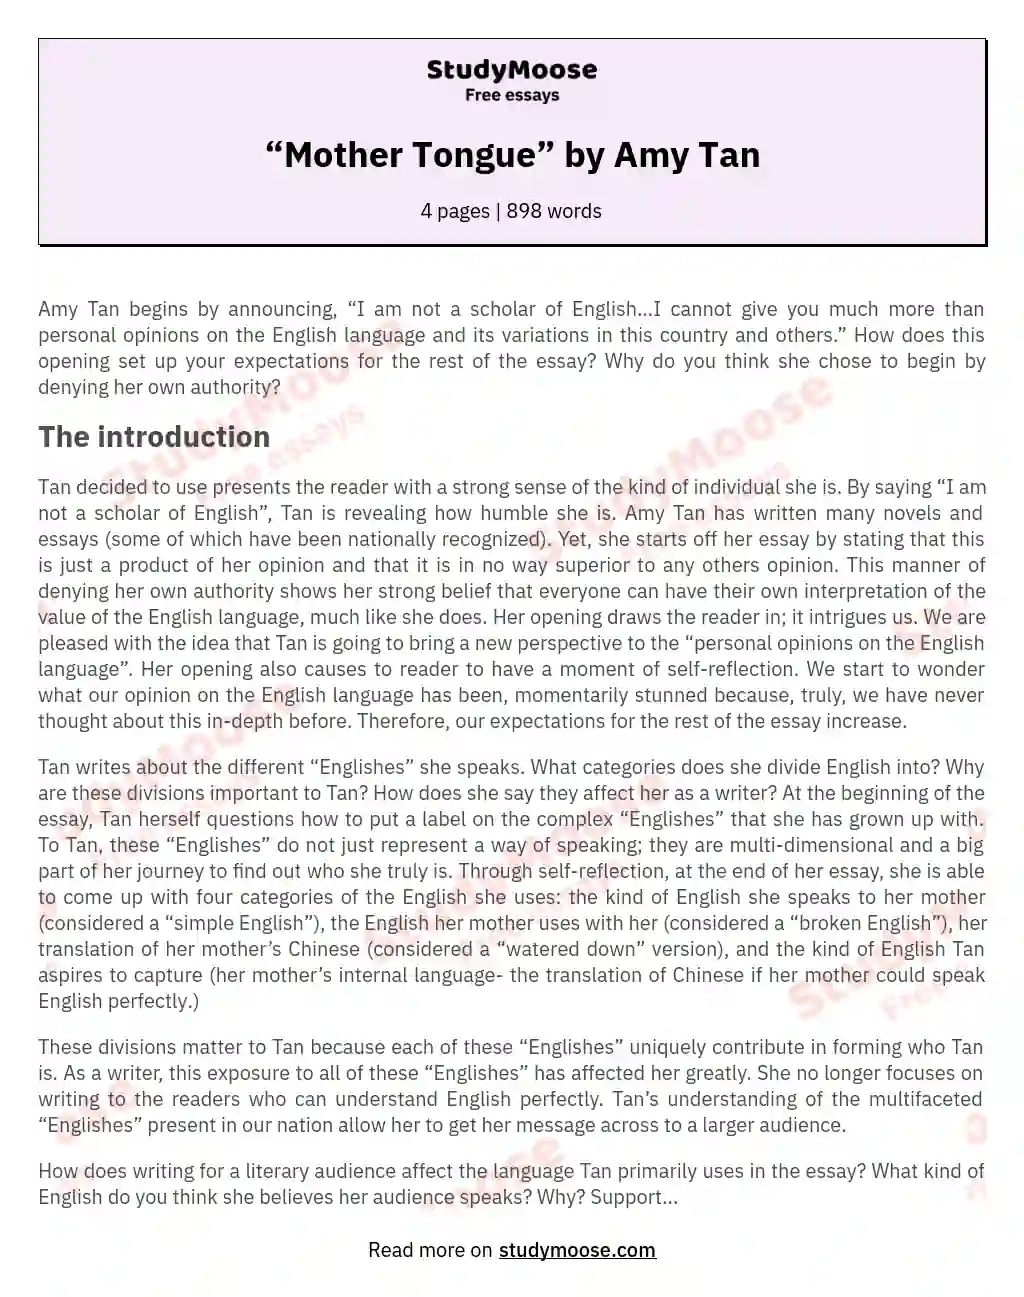 “Mother Tongue” by Amy Tan essay